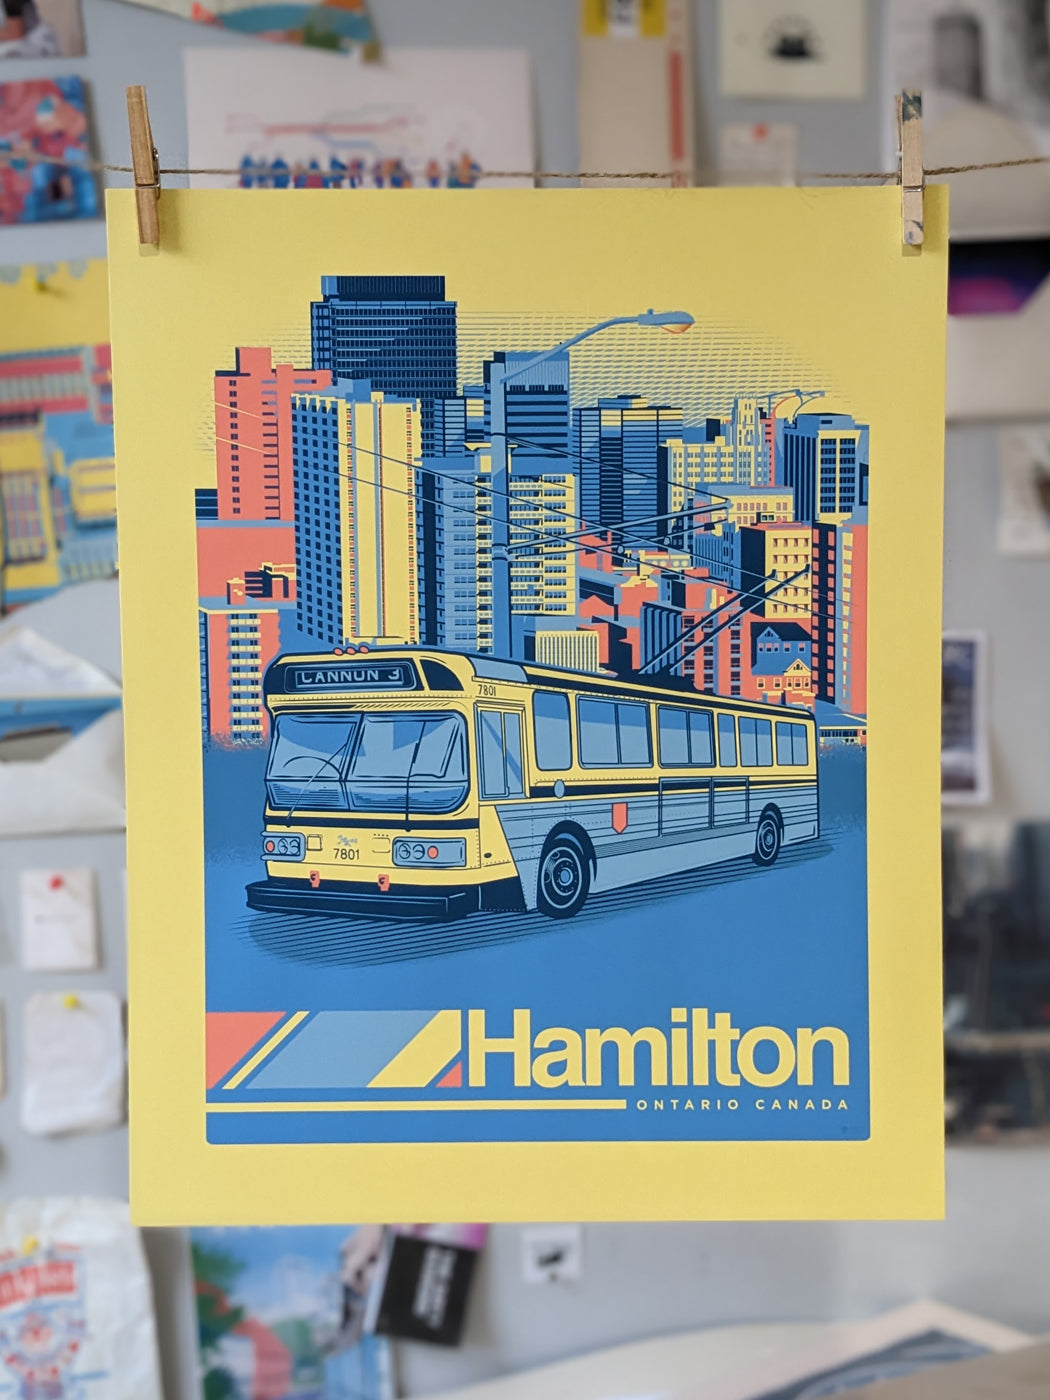 How to get to Stoney Creek, Ontario in Hamilton by Bus?